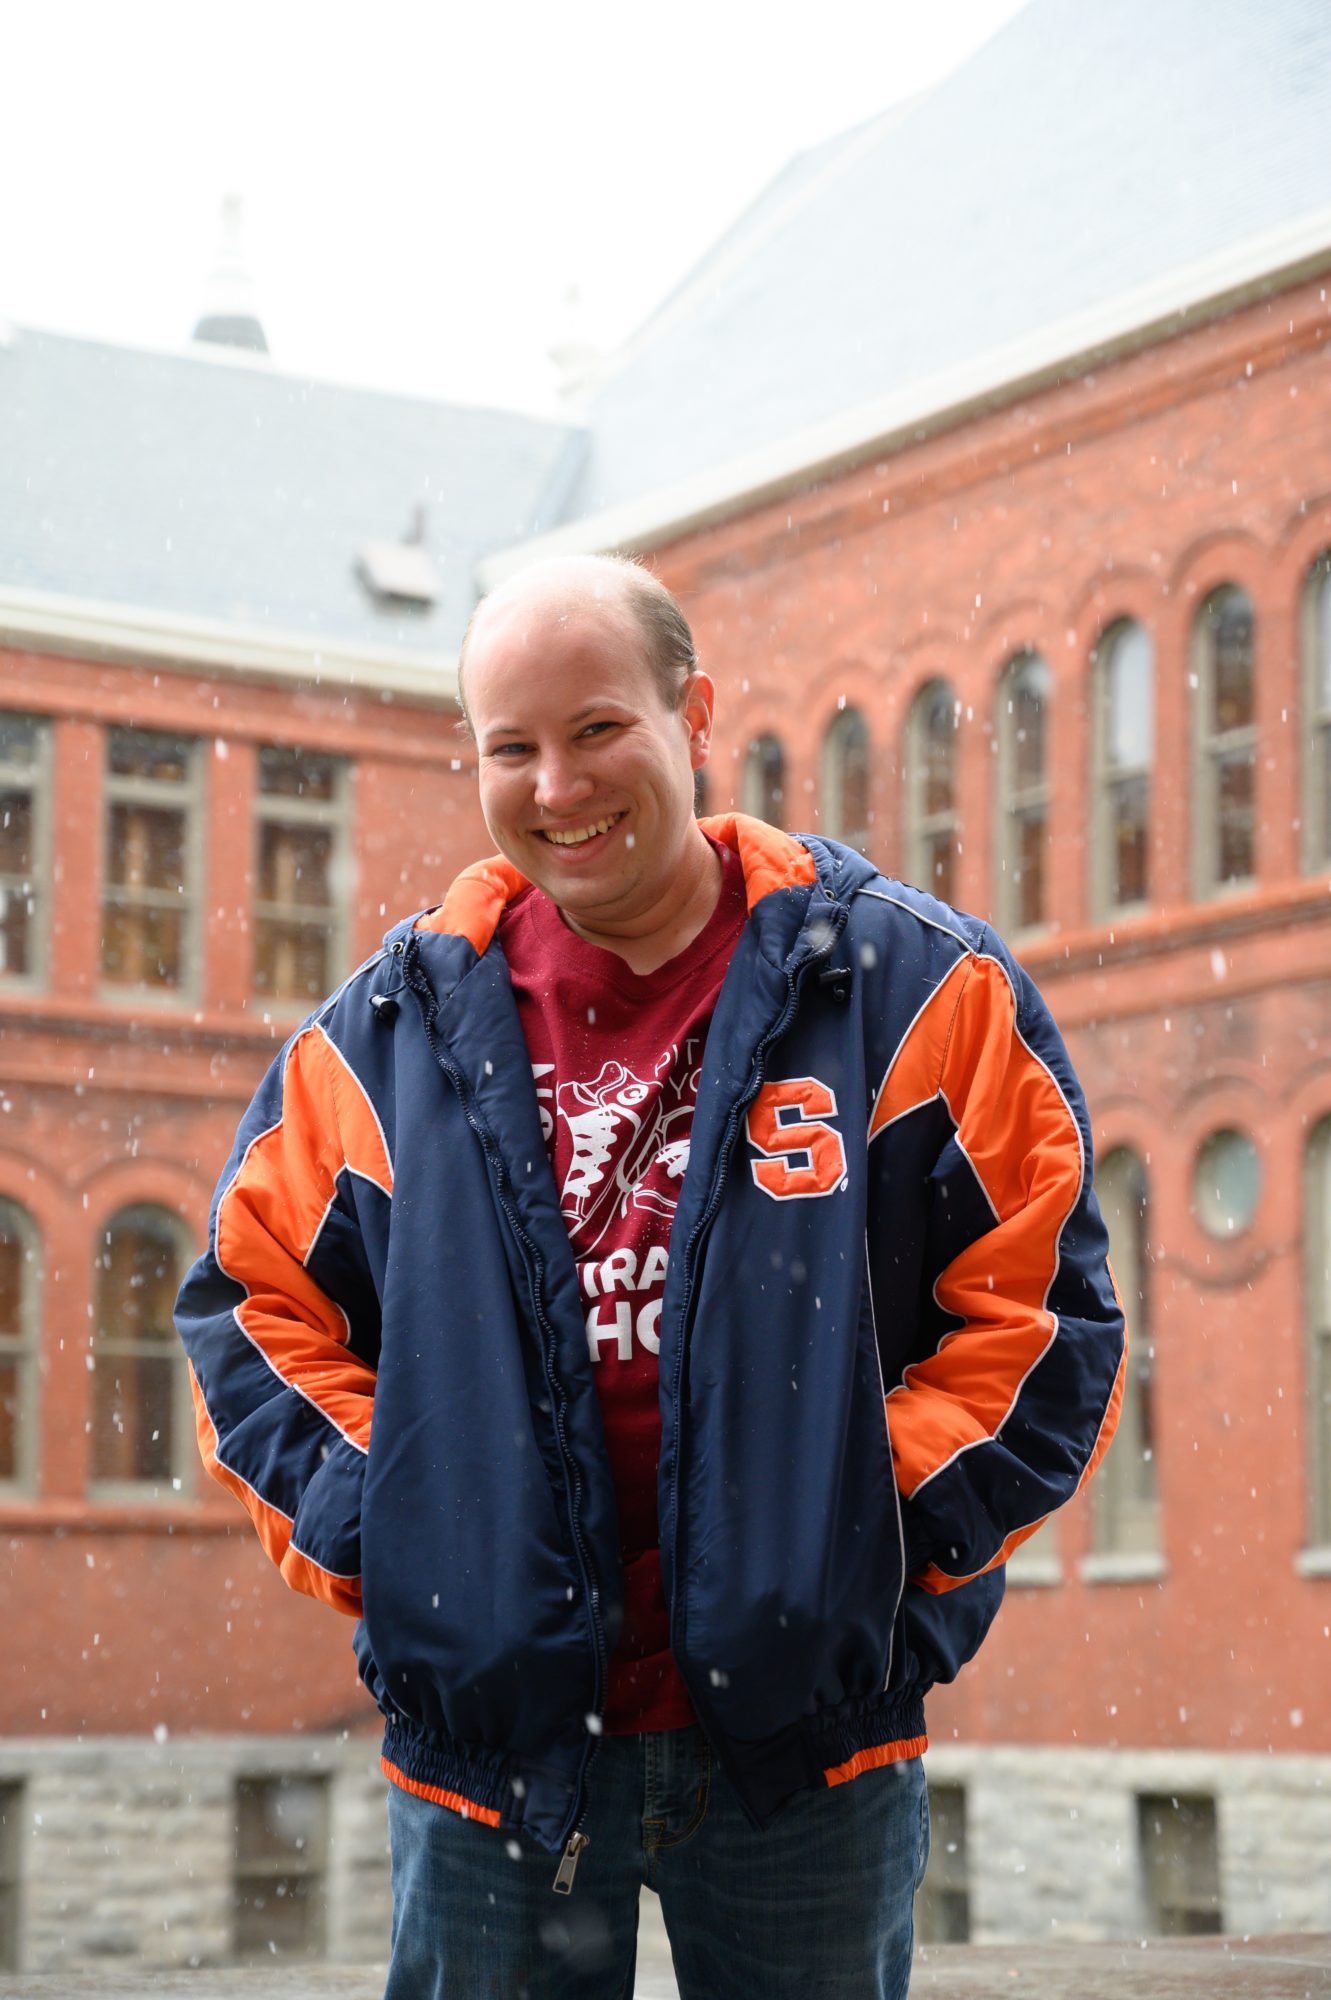 Student in a SU jacket smiling